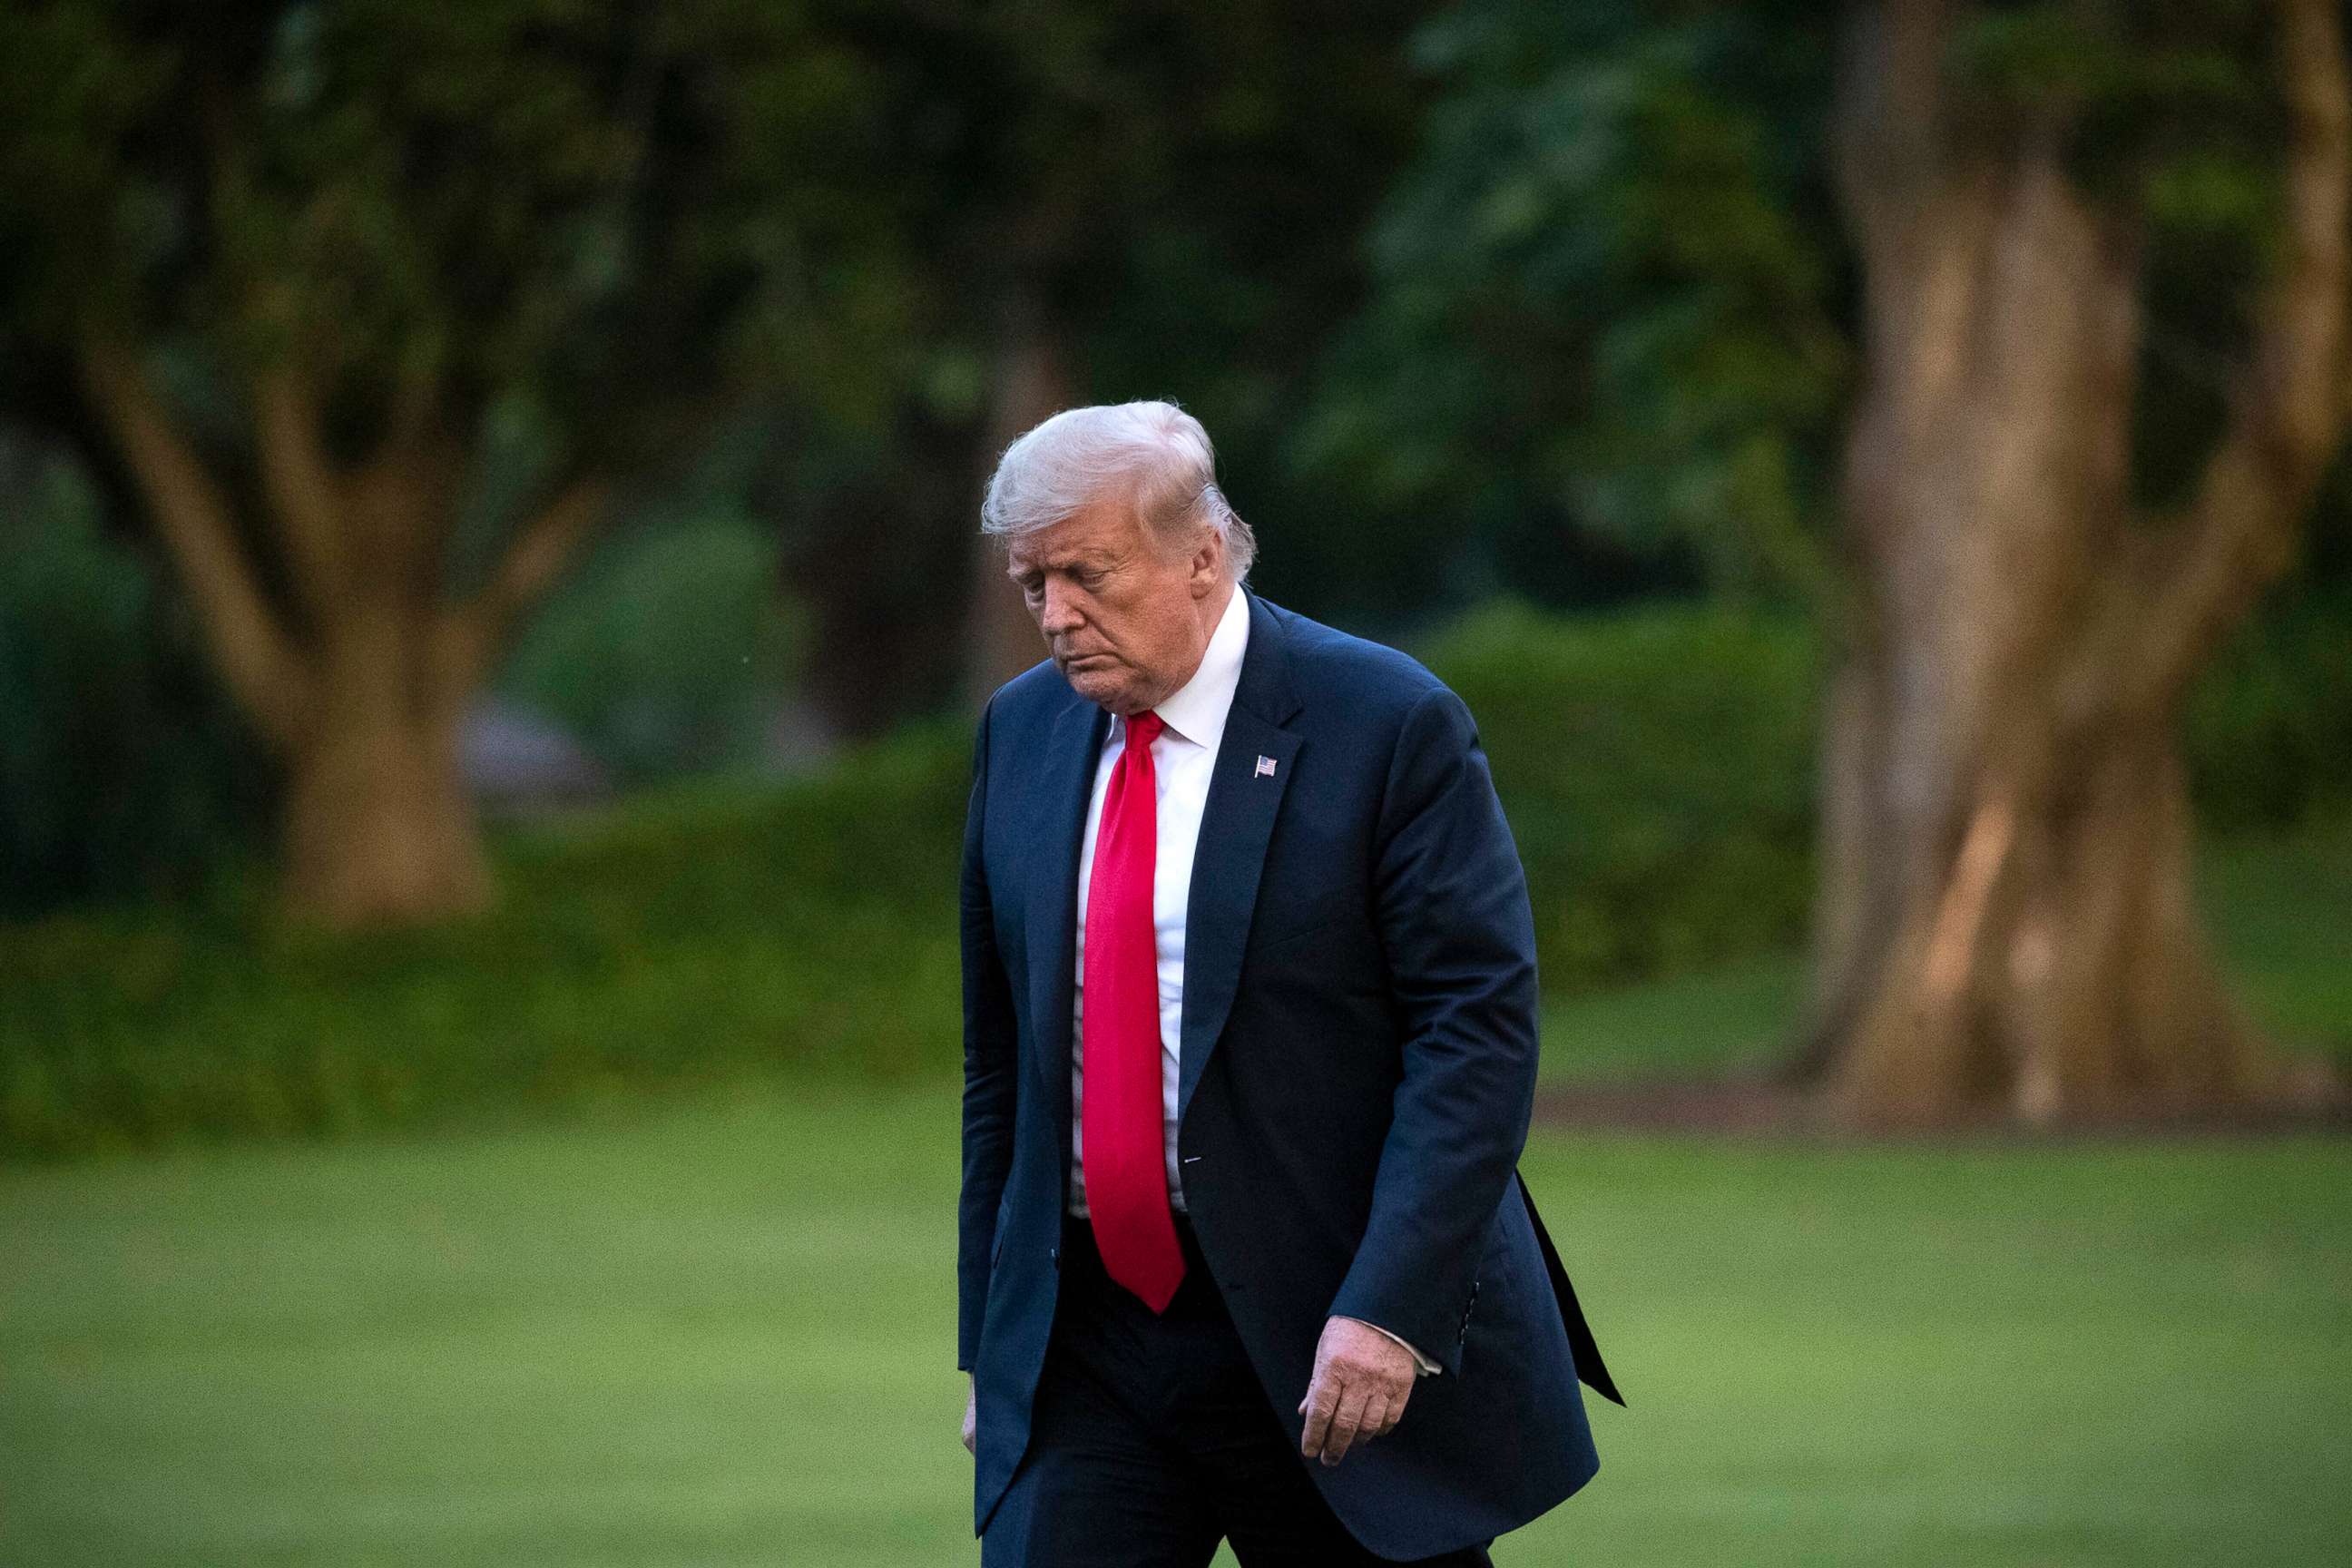 PHOTO: President Donald Trump walks on he South Lawn after arriving on Marine One at the White House, June 25, 2020.